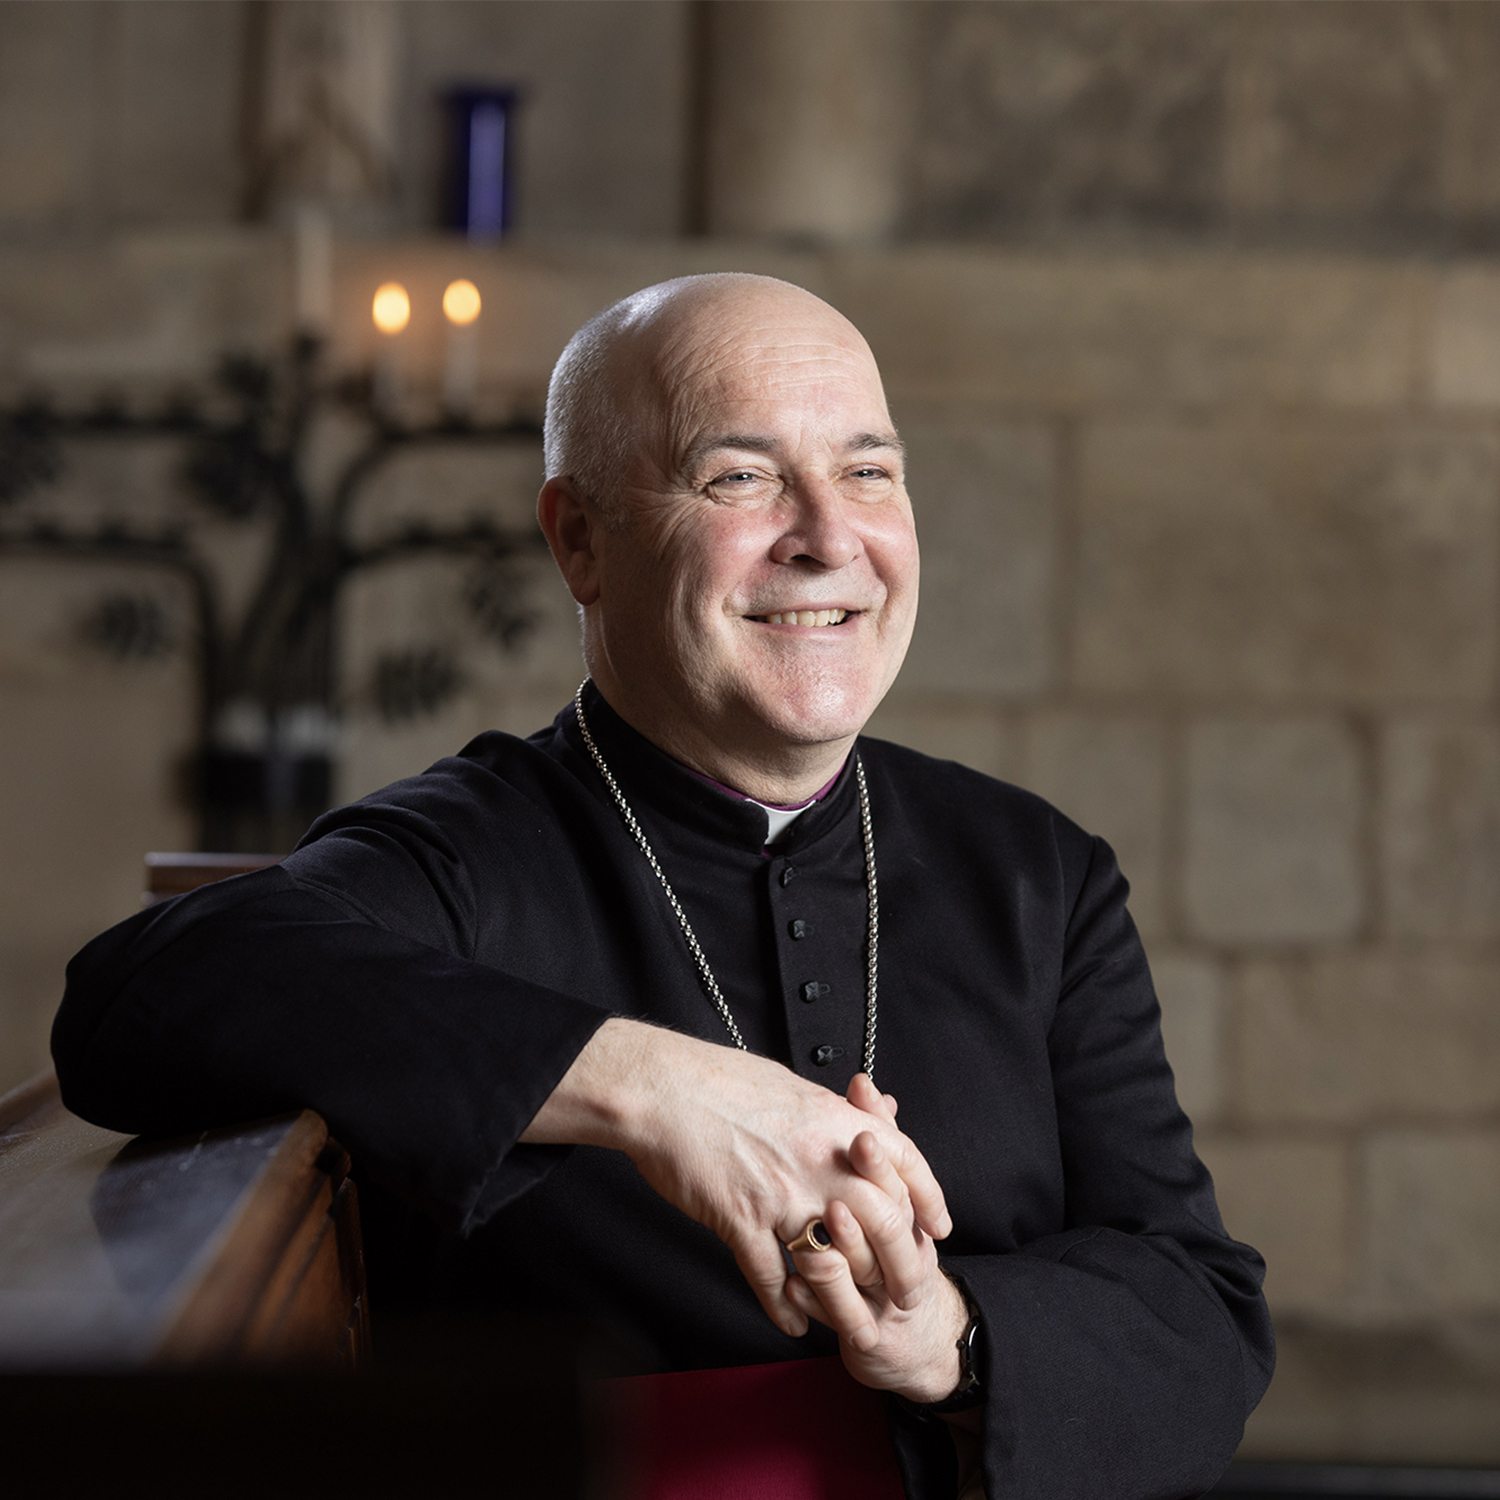 The Archbishop smiles and is in a relaxed seated position in a cathedral setting